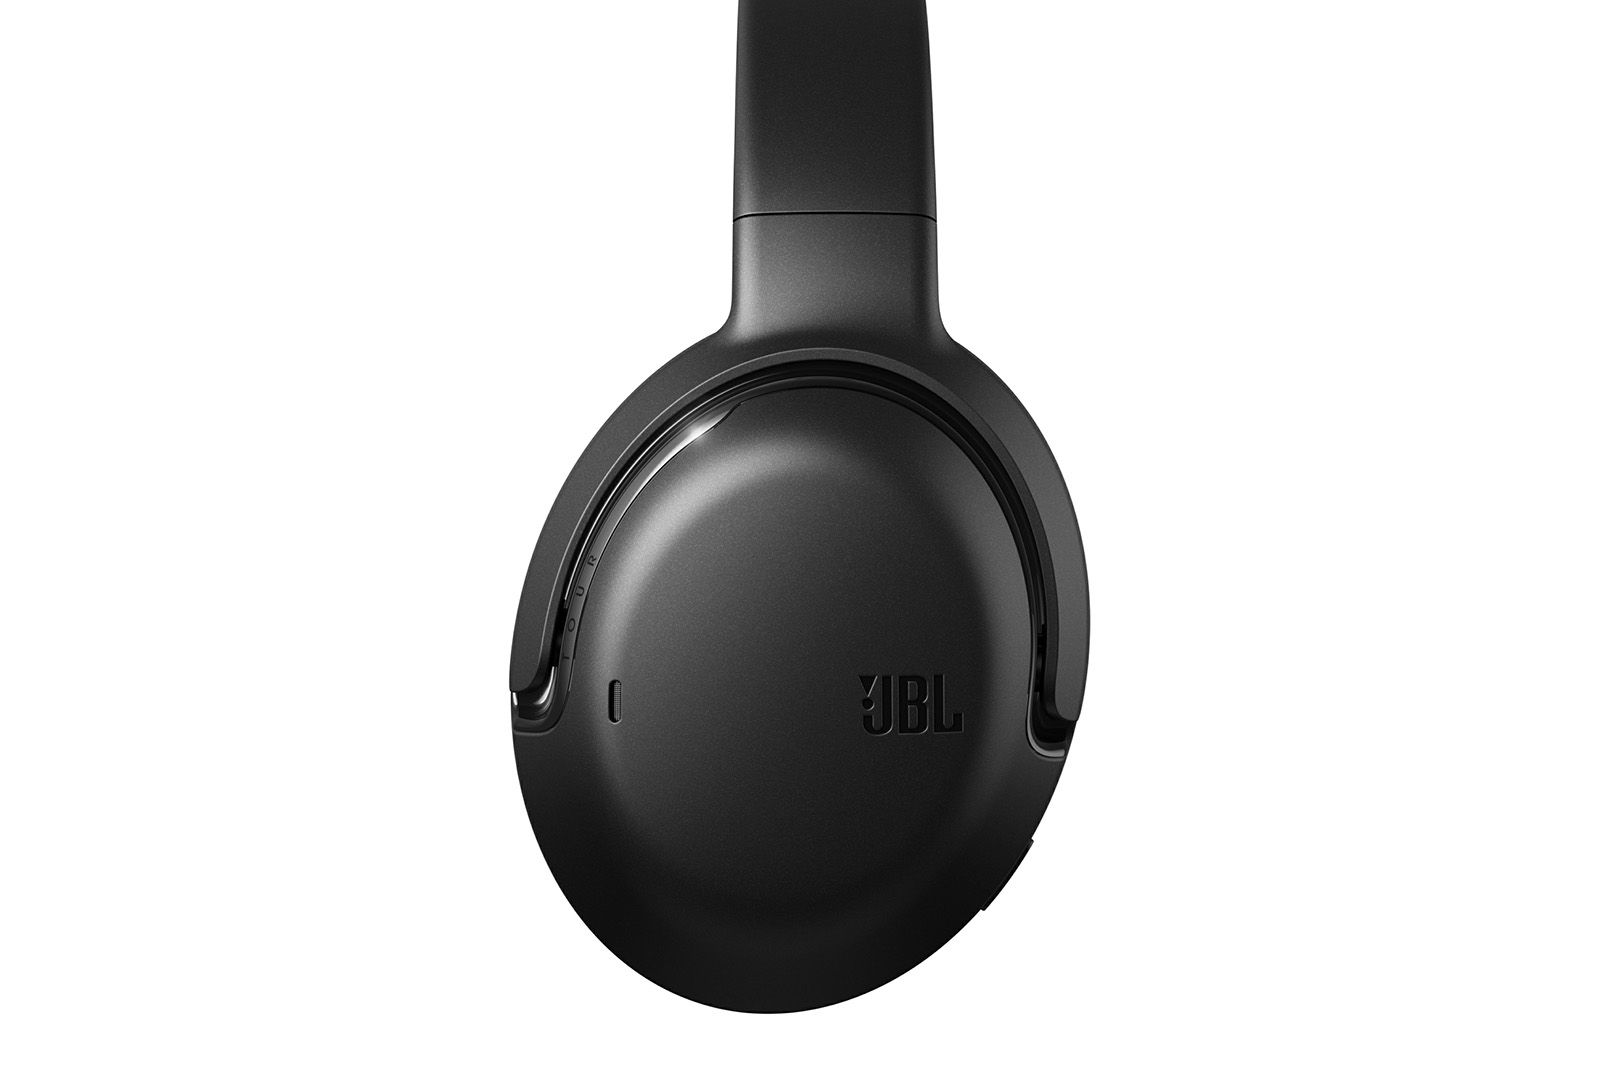 JBL Tour One over-ears and Tour Pro+ TWS earbuds take aim at Bose photo 1